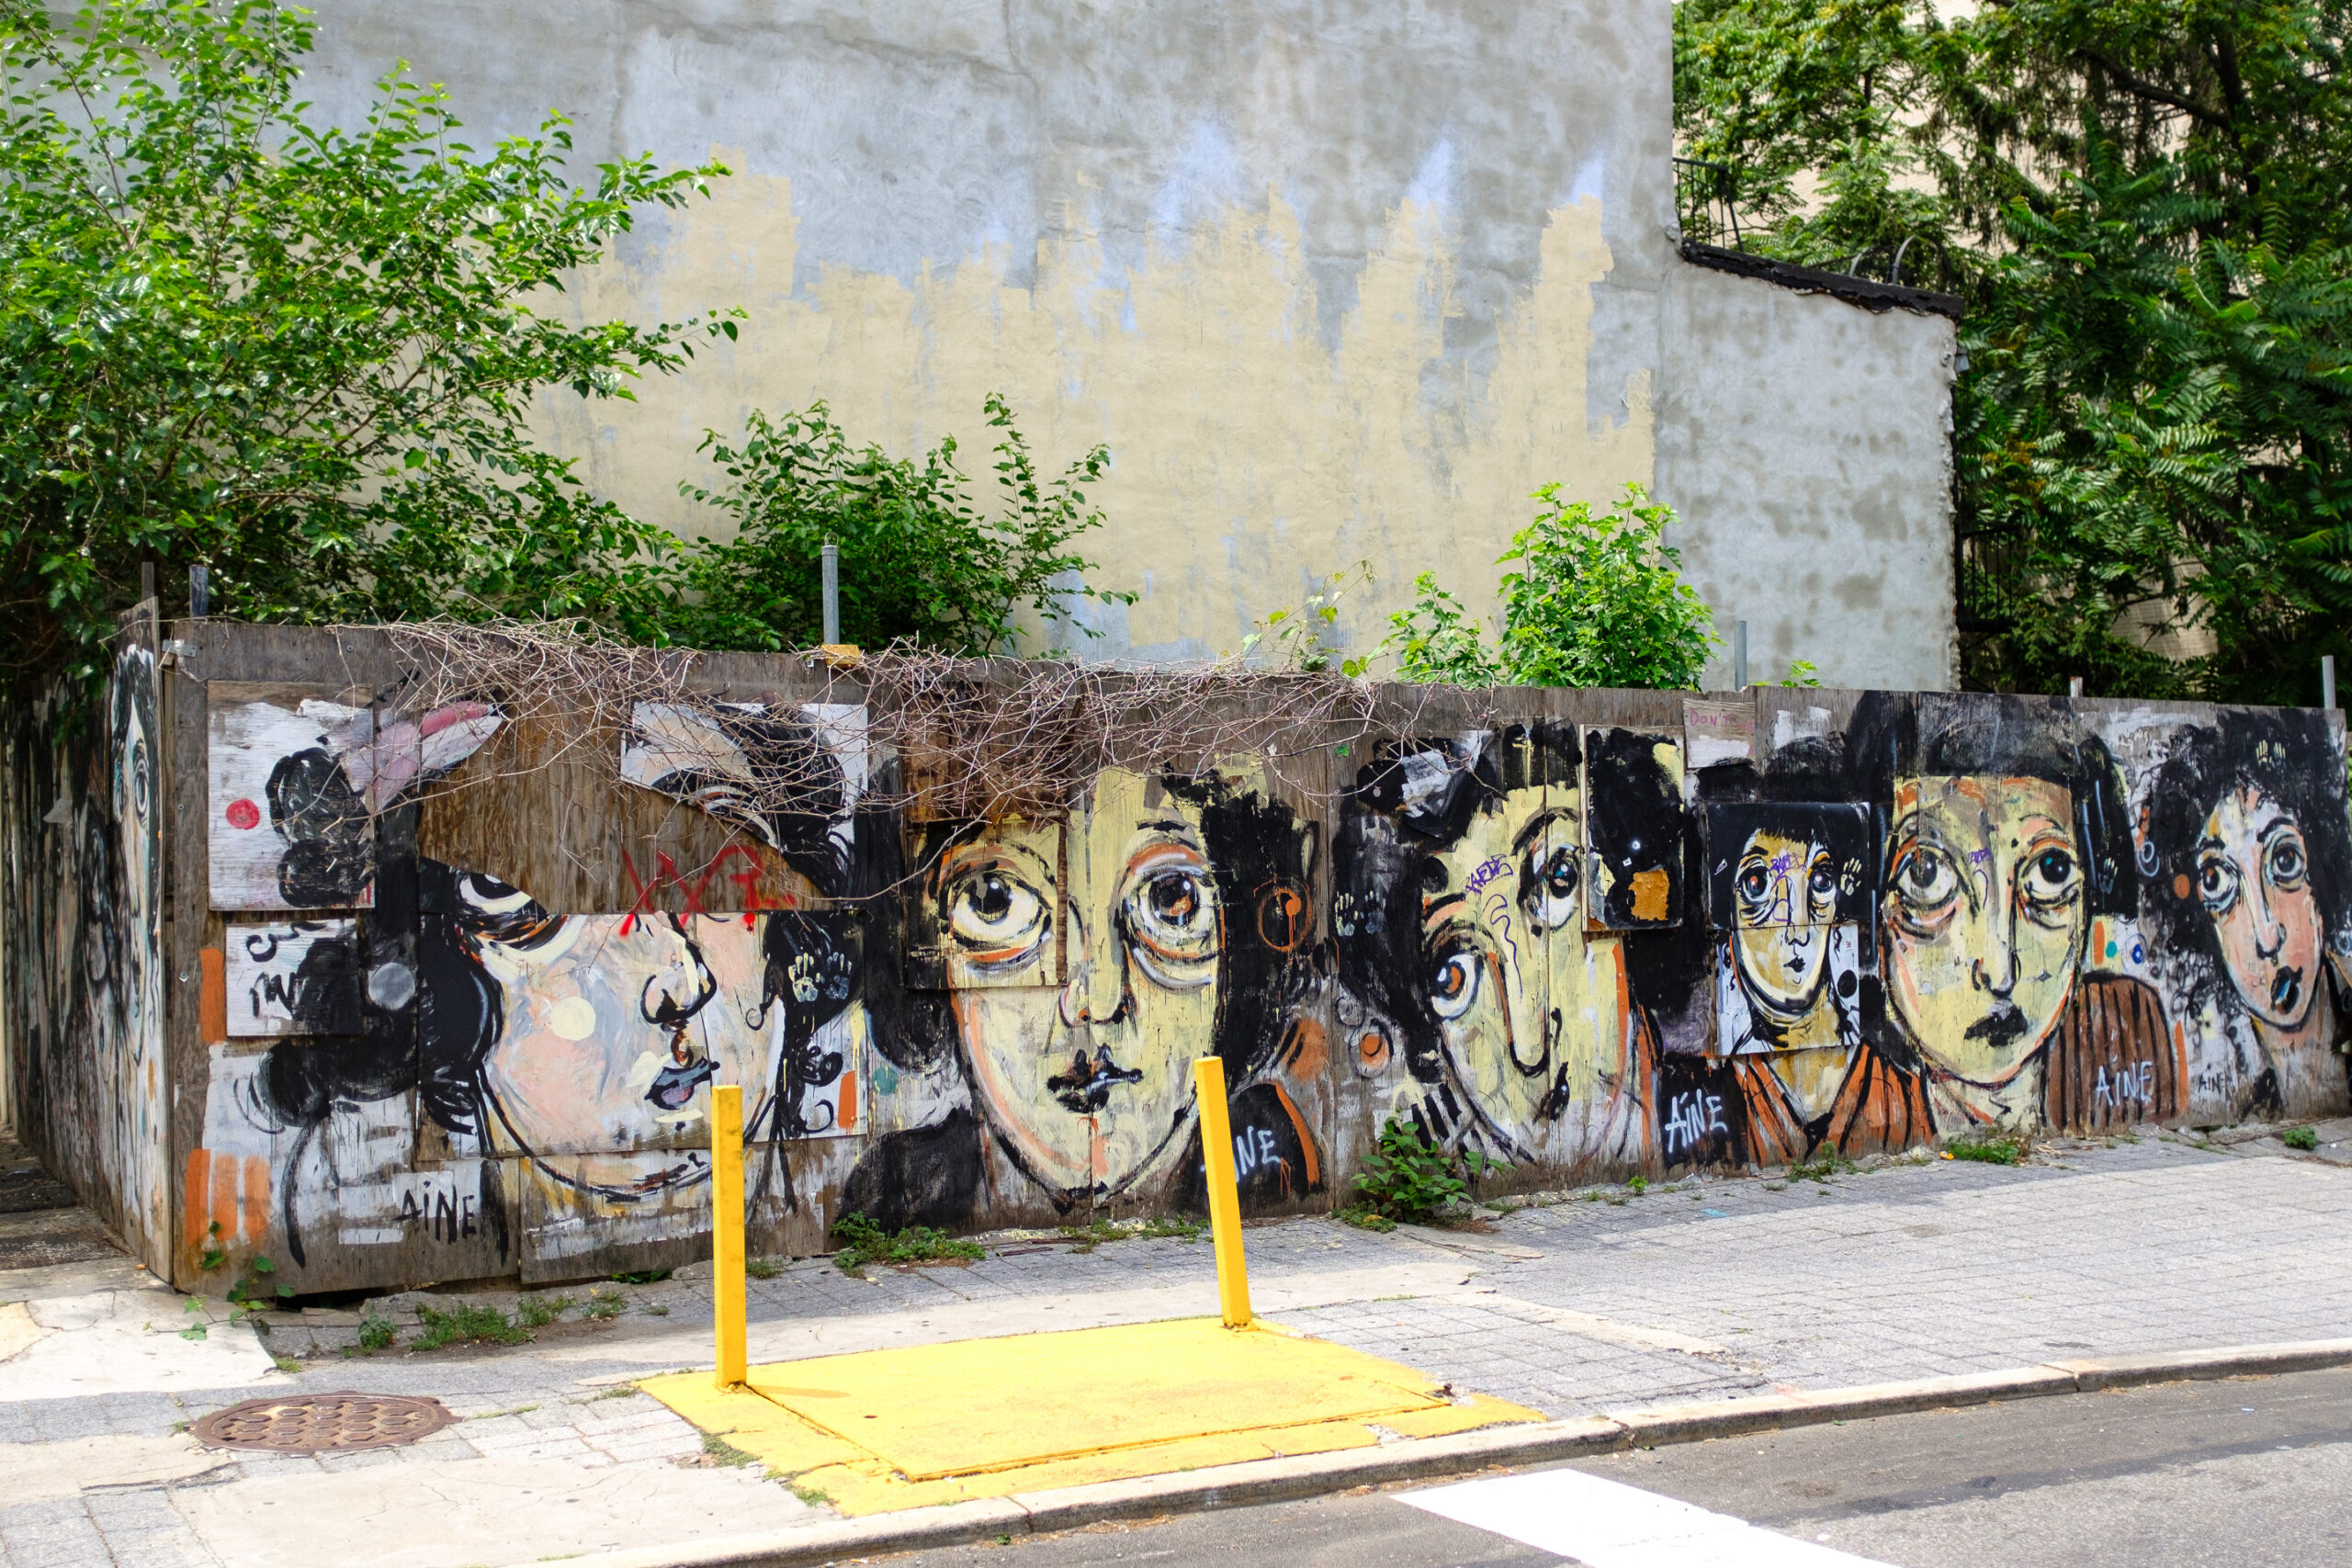 Photo challenge: Show us your favorite shots of graffiti or street art